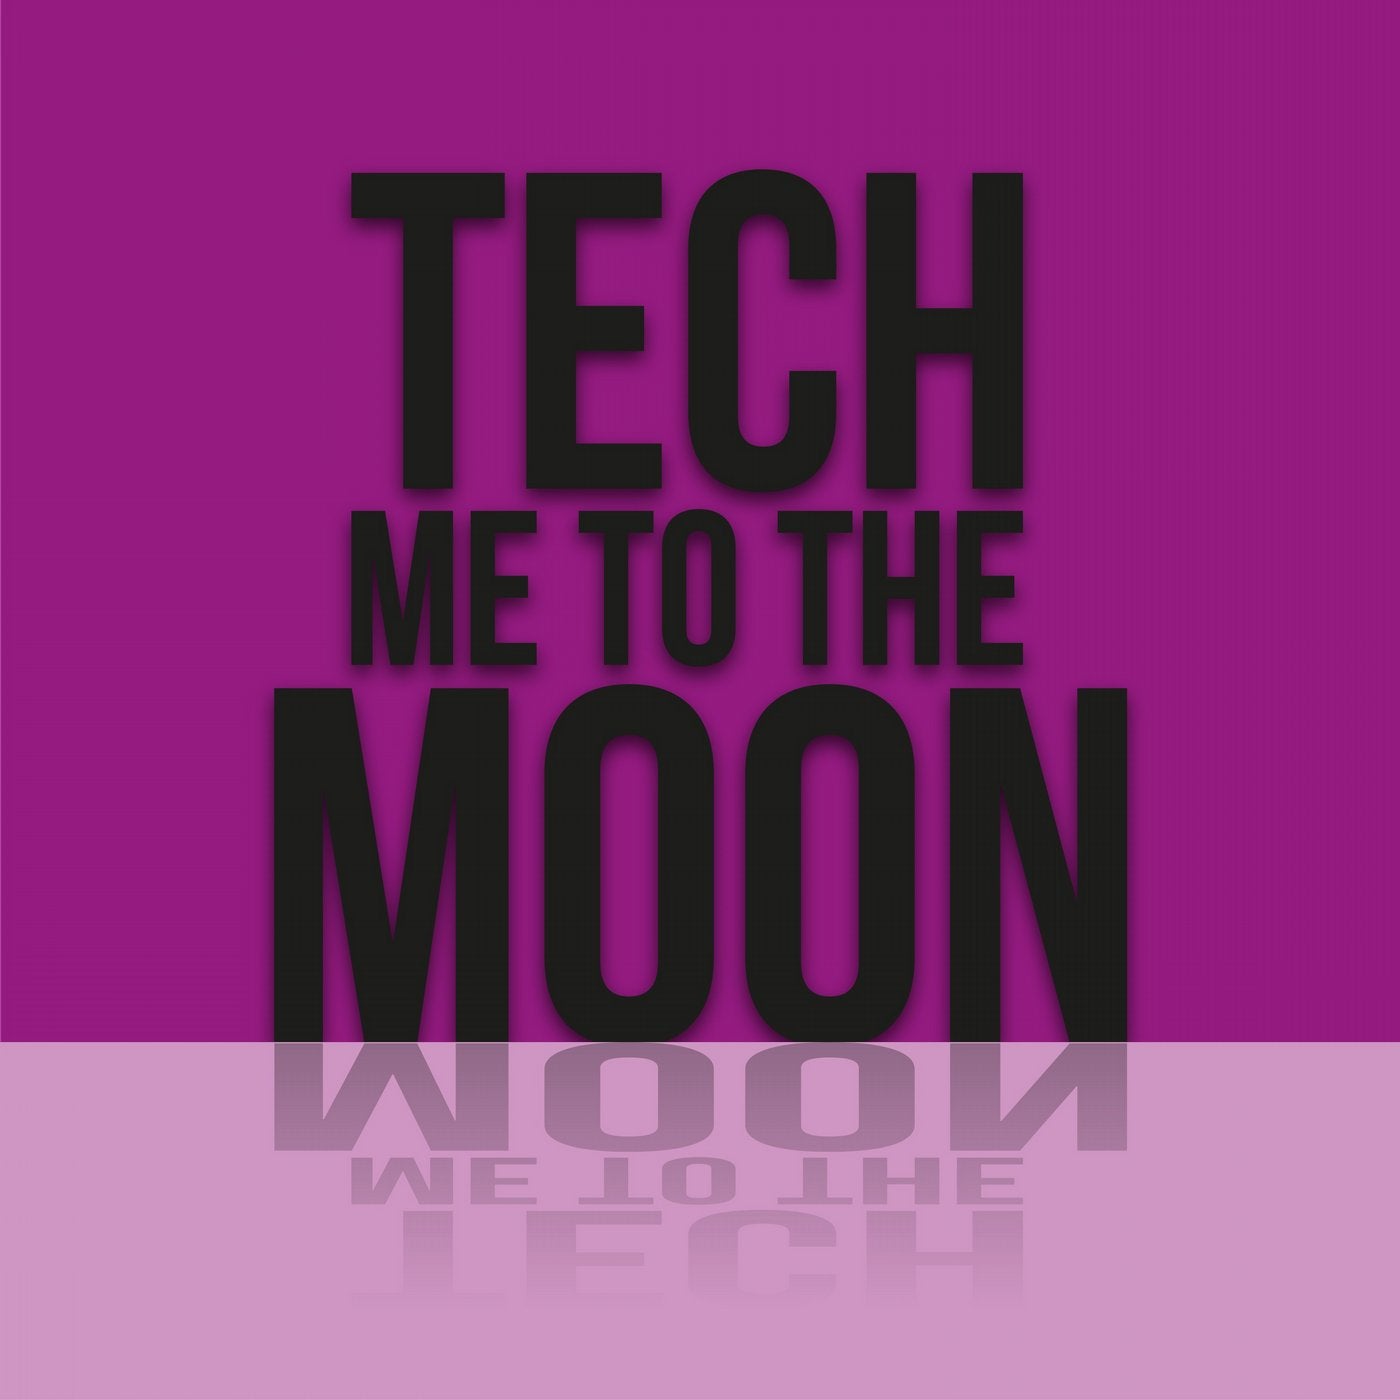 Tech Me to the Moon